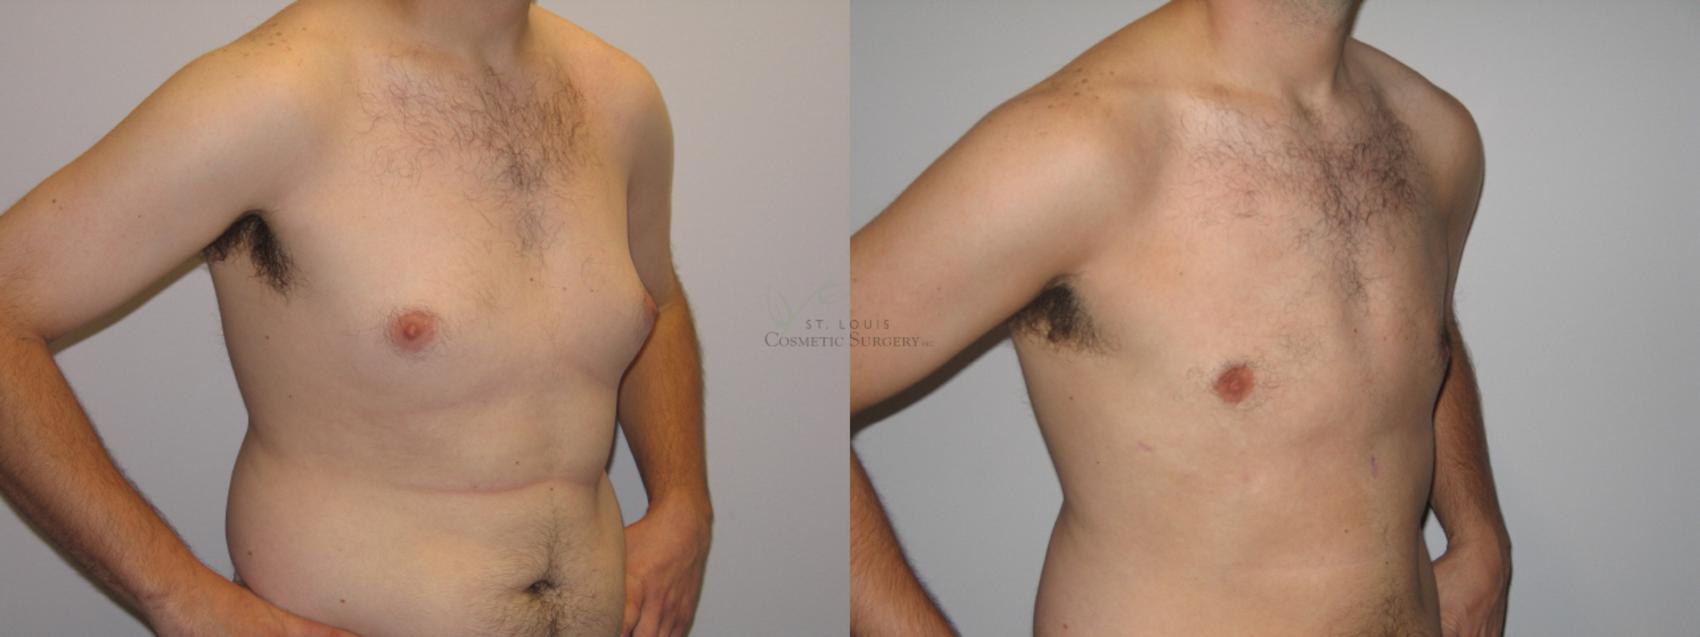 Male Breast Reduction Before & After Photo | St. Louis, MO | St. Louis Cosmetic Surgery